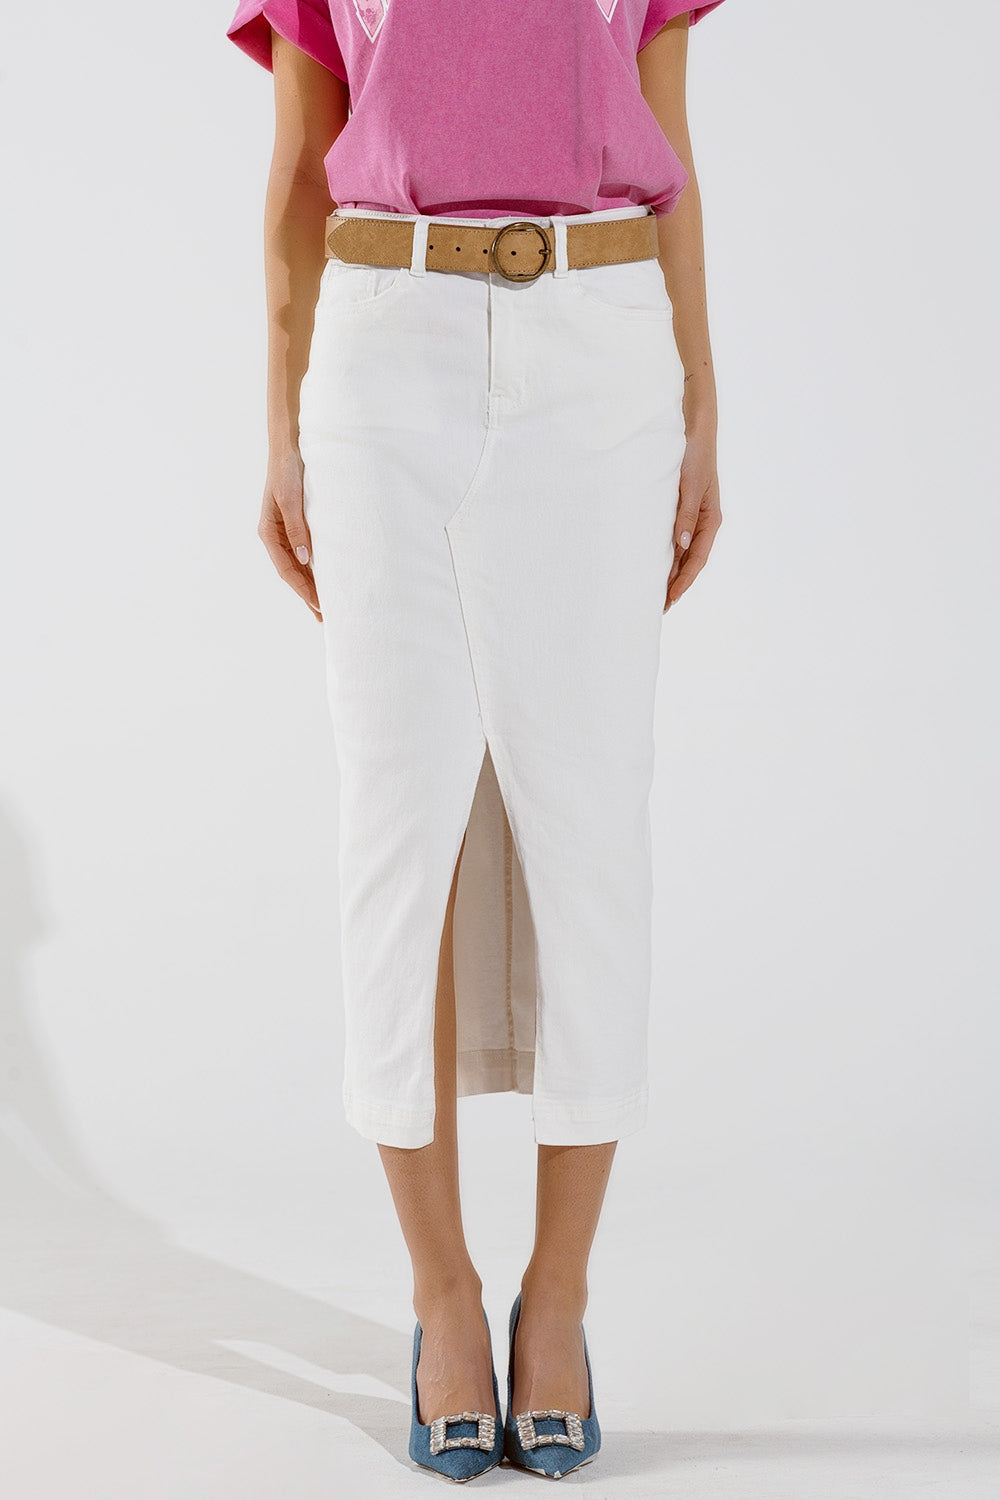 Q2 Denim  Maxi Skirt With Split in The Front In White